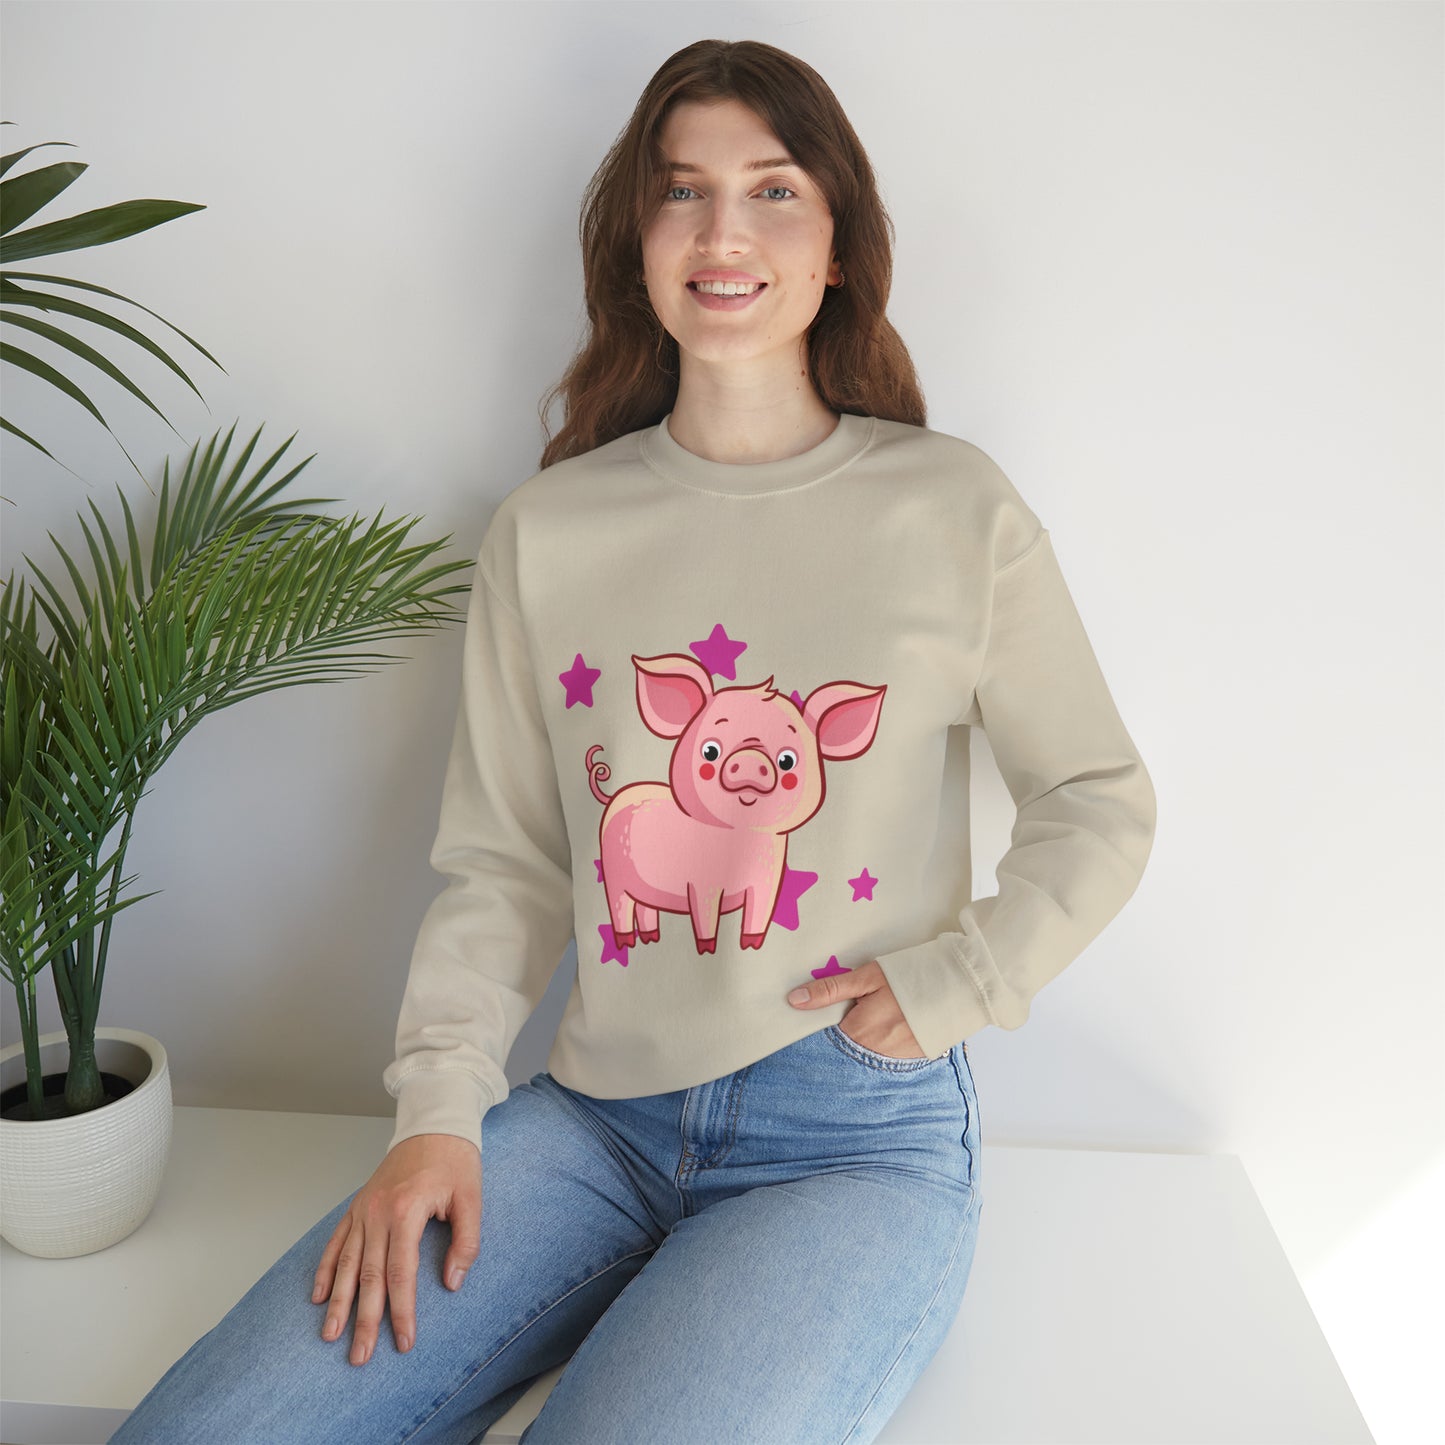 Brighten up your day with this star studded piggy design! Give the gift of this Unisex Heavy Blend™ Crewneck Sweatshirt or get one for yourself.